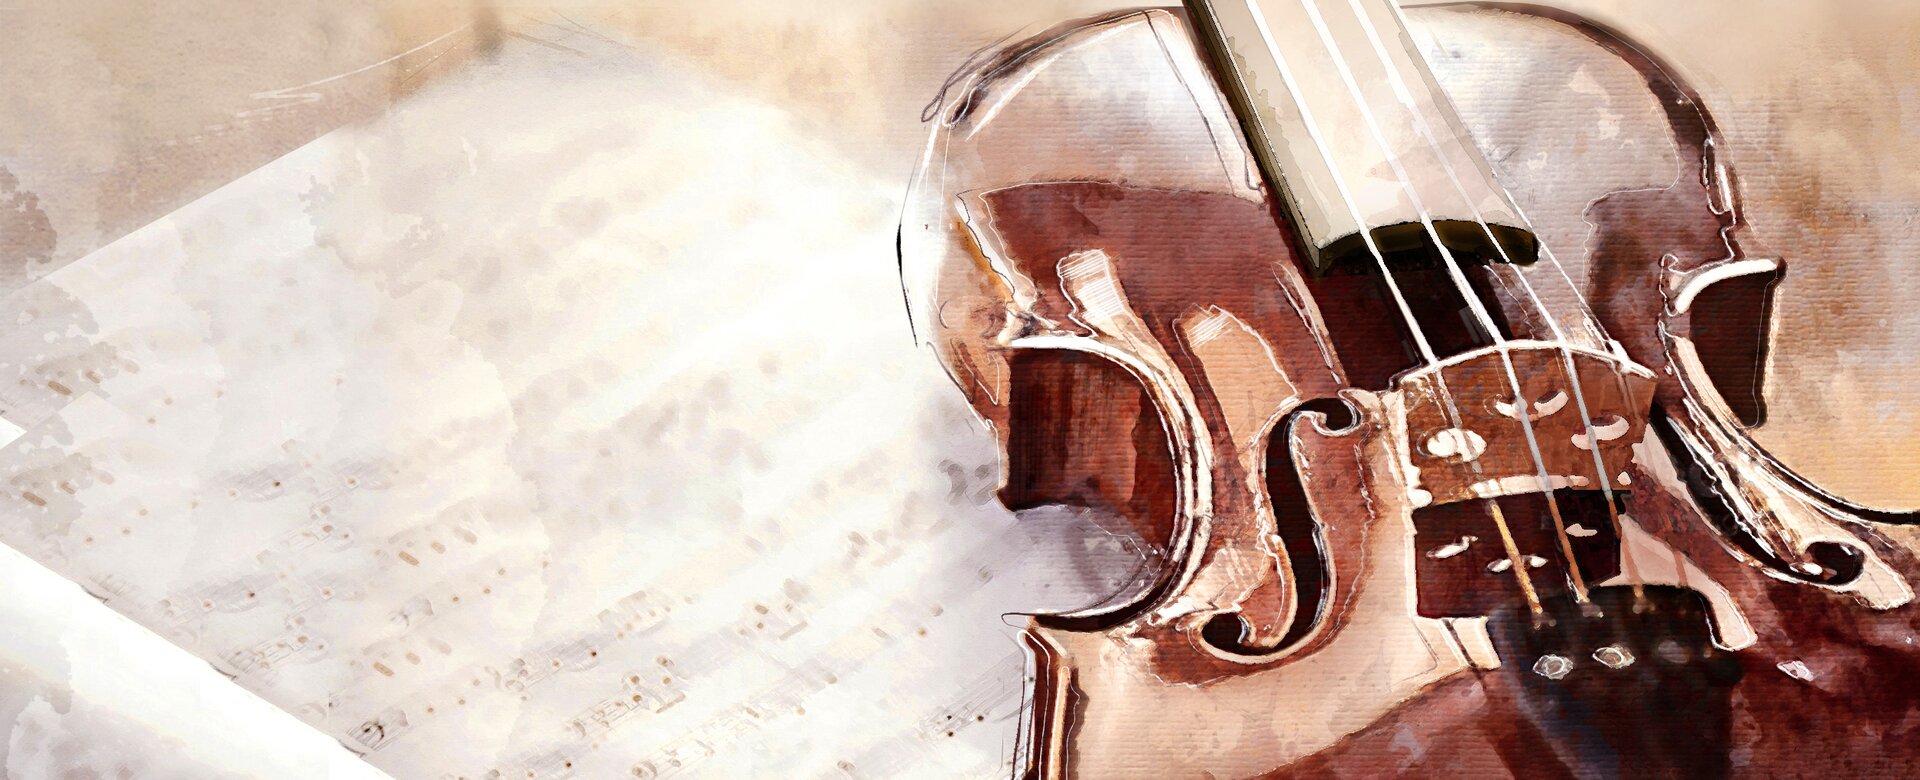 Drawn picture shows a violin lying on a sheet of music